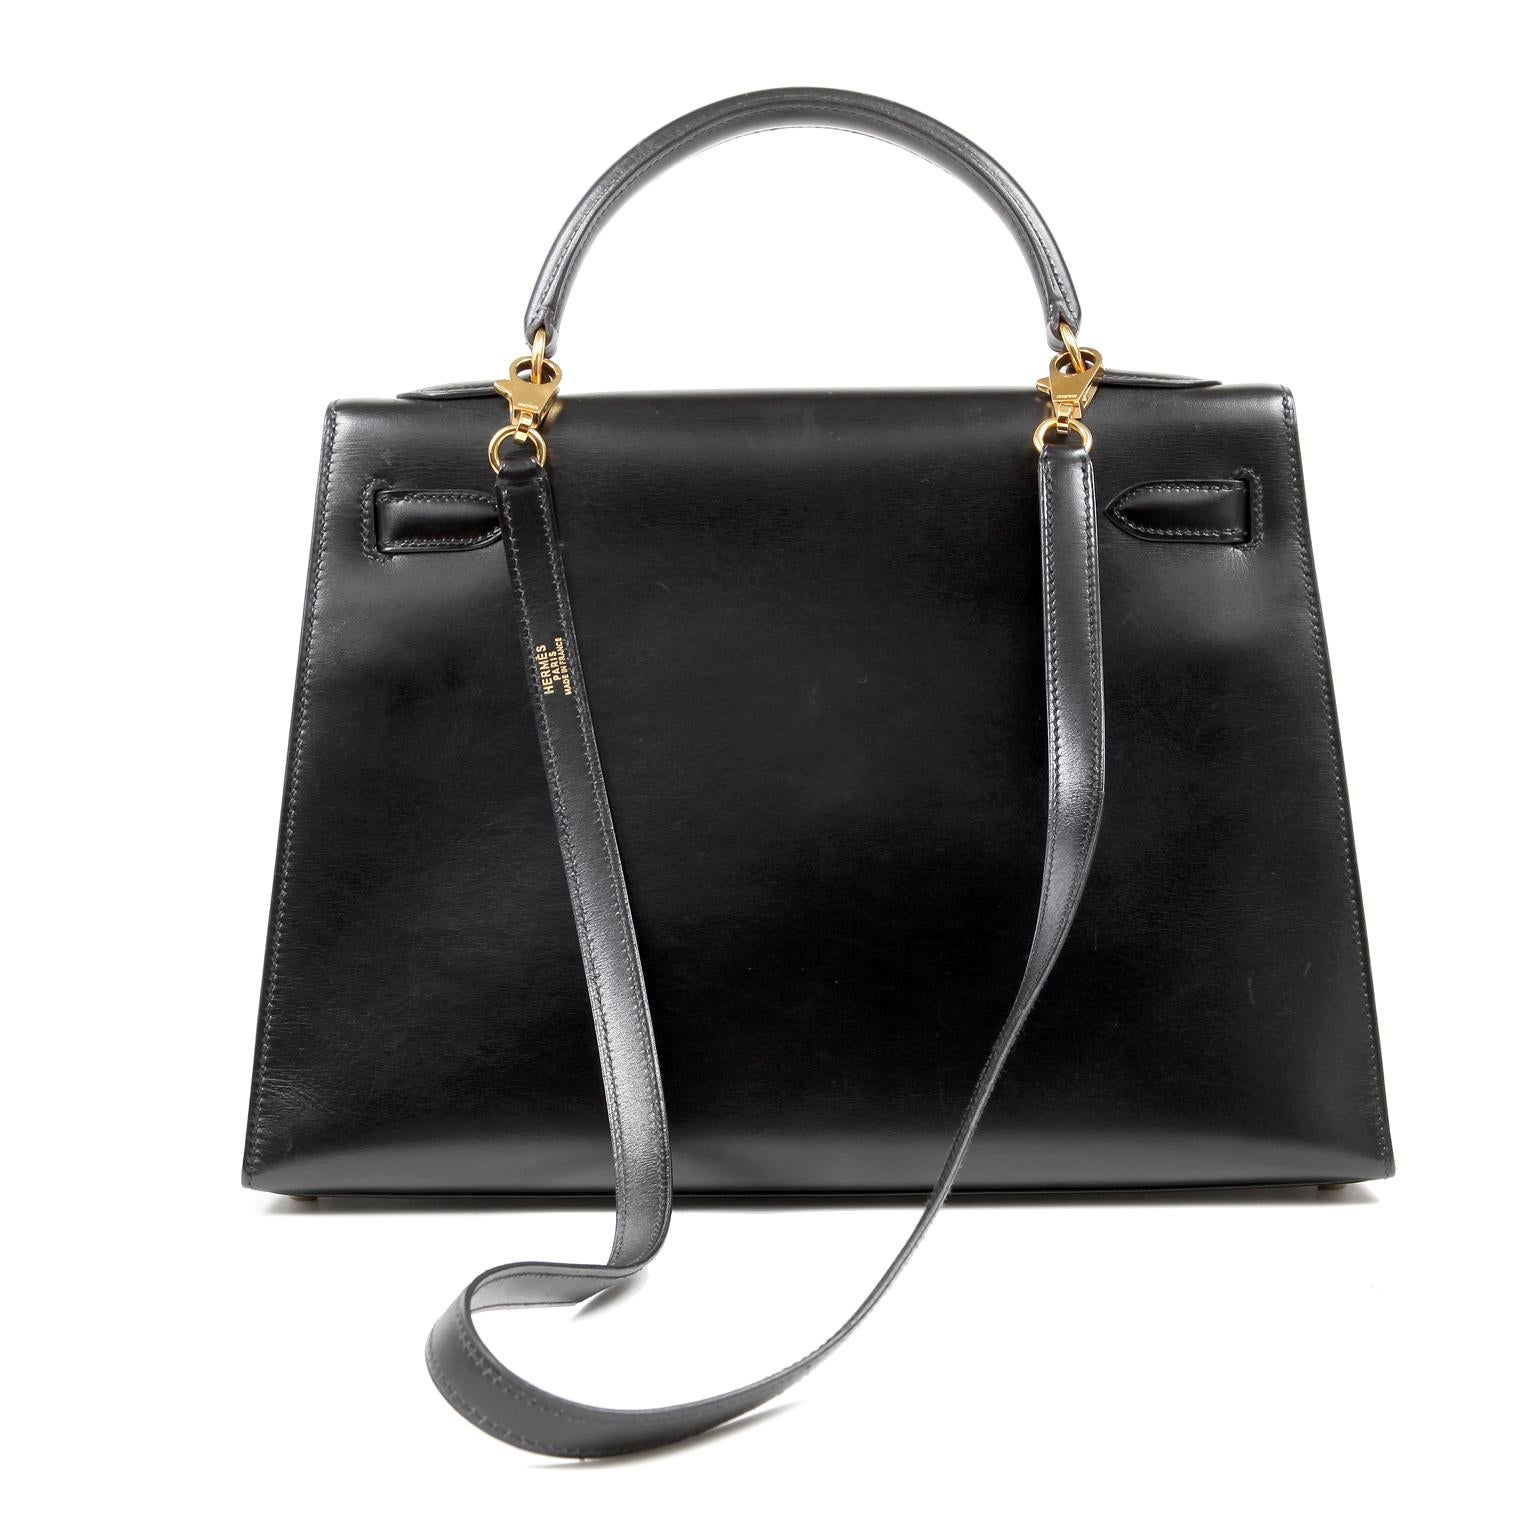 This authentic Hermès Black Box Calf 32 cm Kelly is in truly mint condition.  Hermès bags are considered the ultimate luxury item worldwide.  Each piece is handcrafted with waitlists that can exceed a year or more.  The ladylike Kelly is classic and